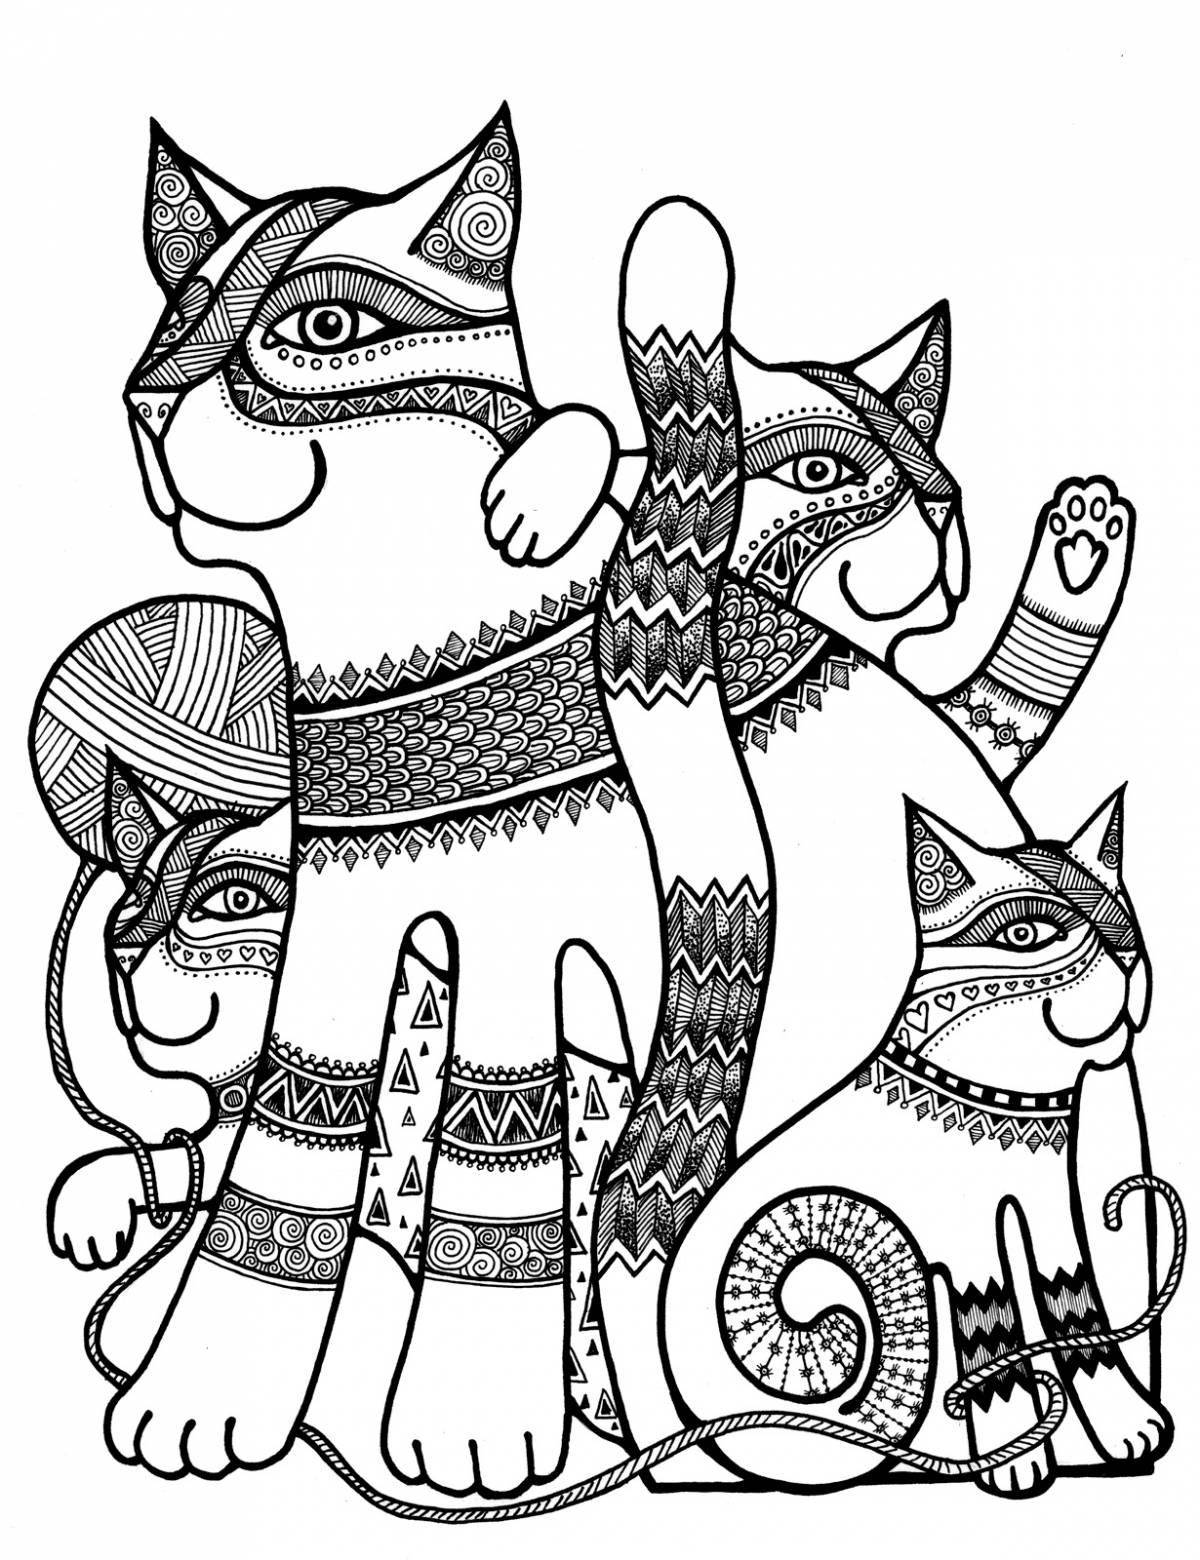 Coloring cat colorful pattern